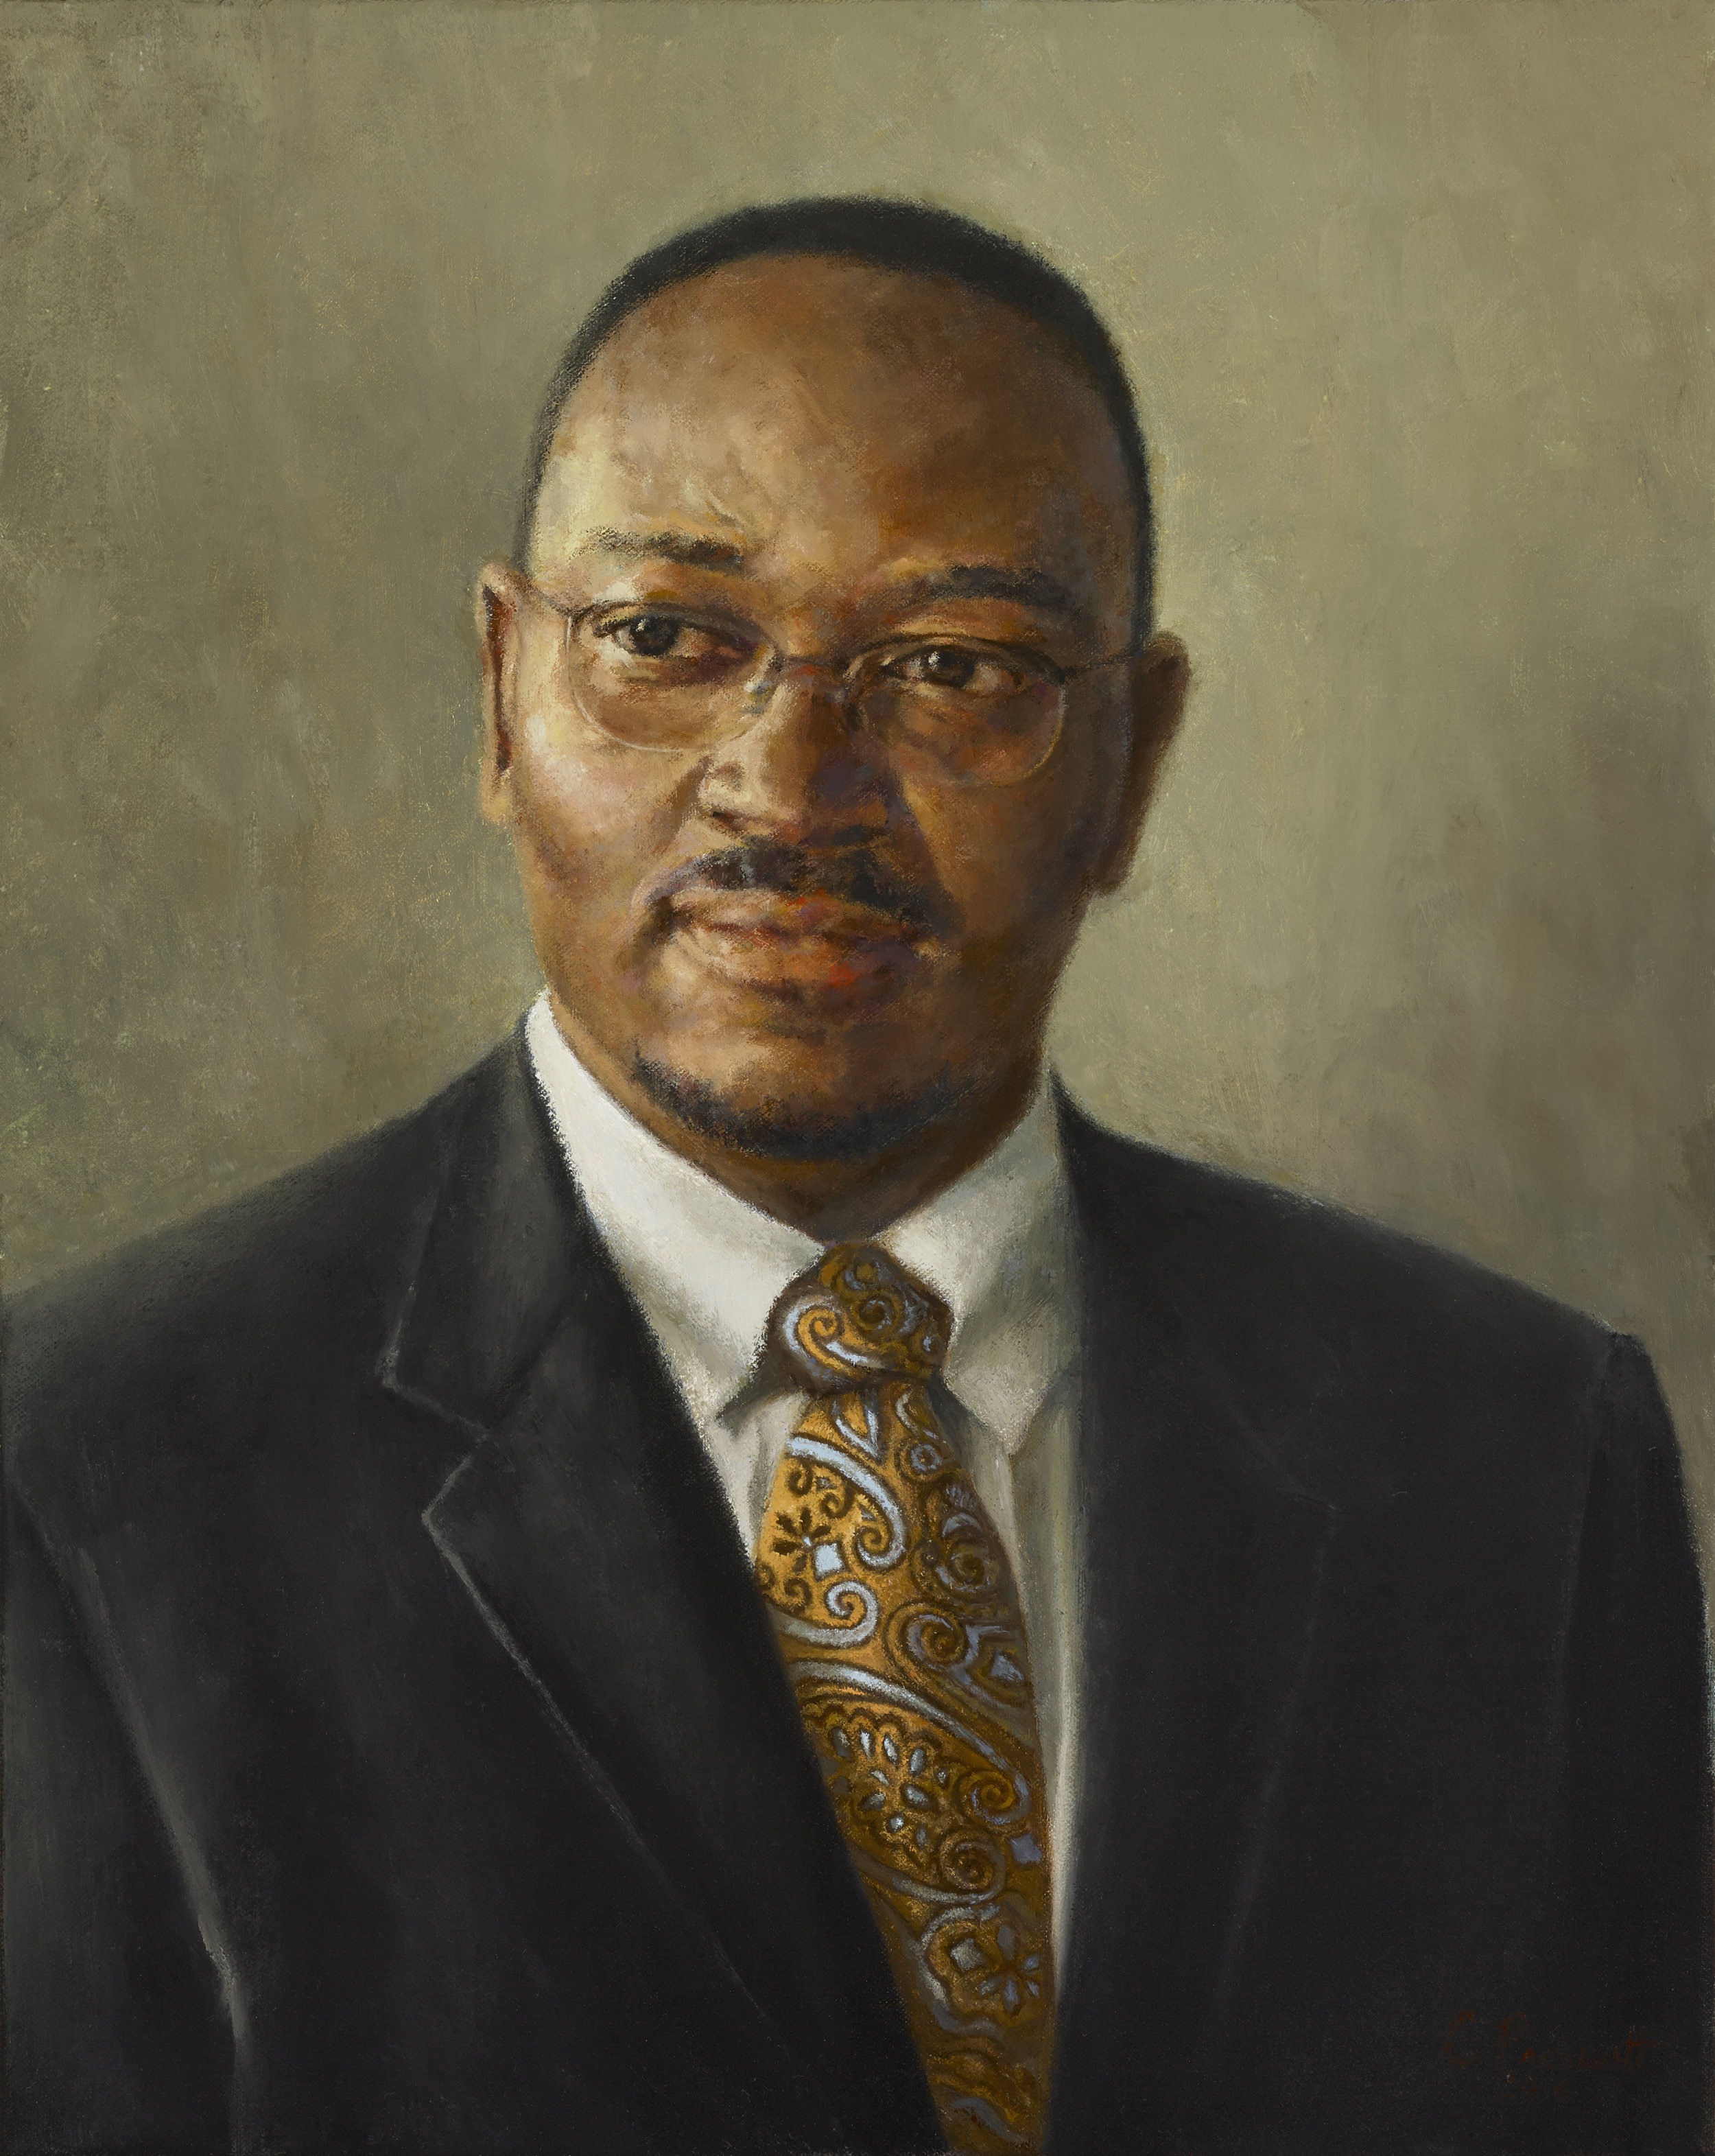   The Honorable Reverend Clementa C. Pinckney, &nbsp;2016, Oil on Canvas, 20” x 16”, Private Collection  Pastor of Emanuel AME Church, Charleston, and one of the nine killed June, 2015 